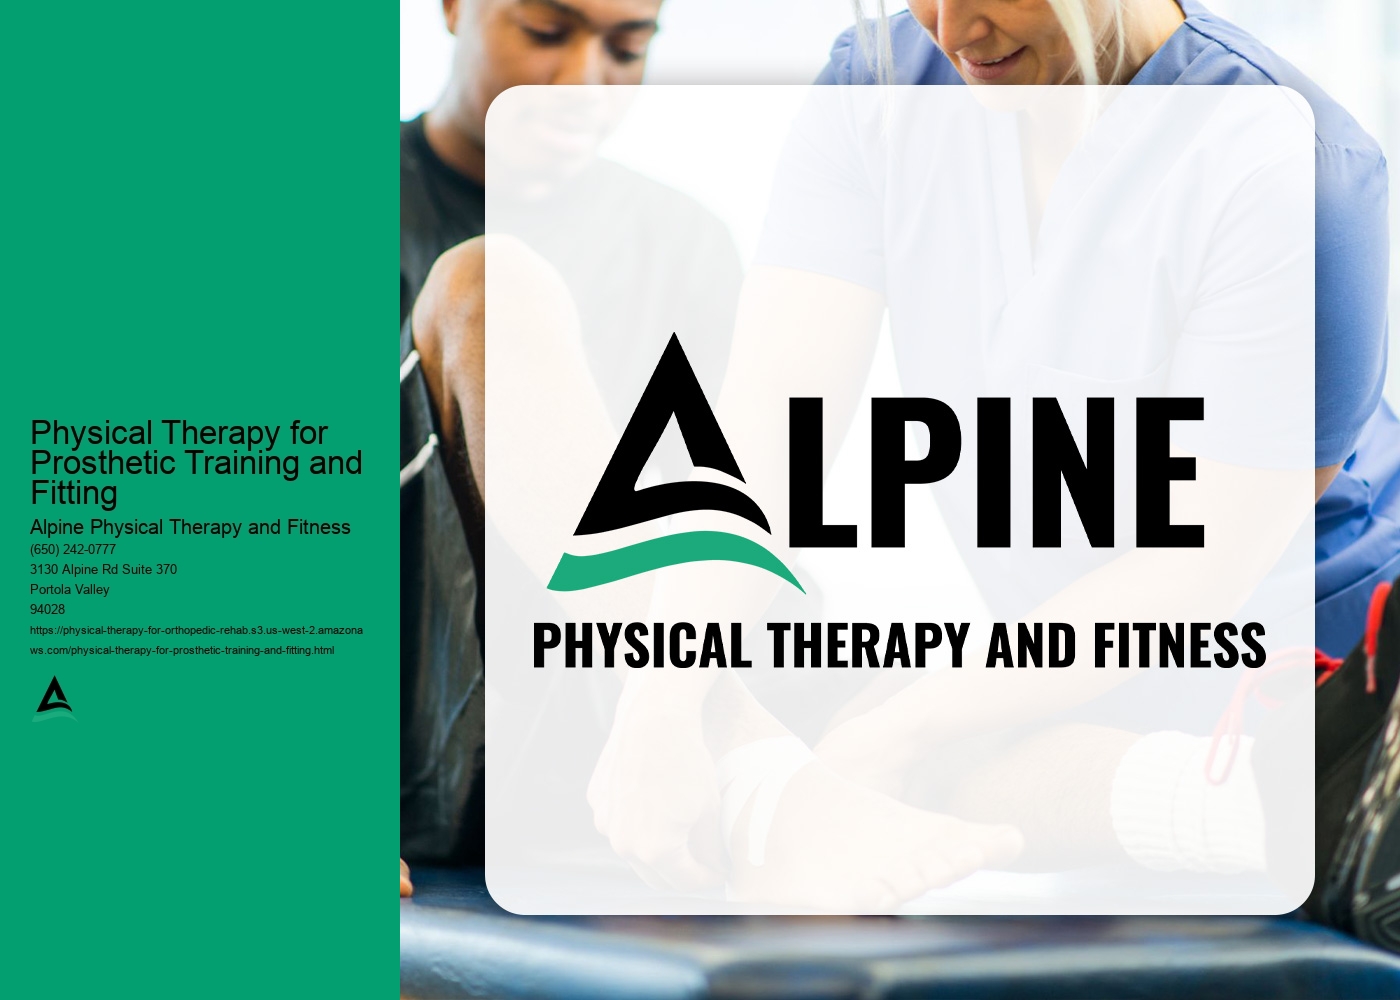 Can physical therapy help improve balance and coordination for individuals with prosthetics?